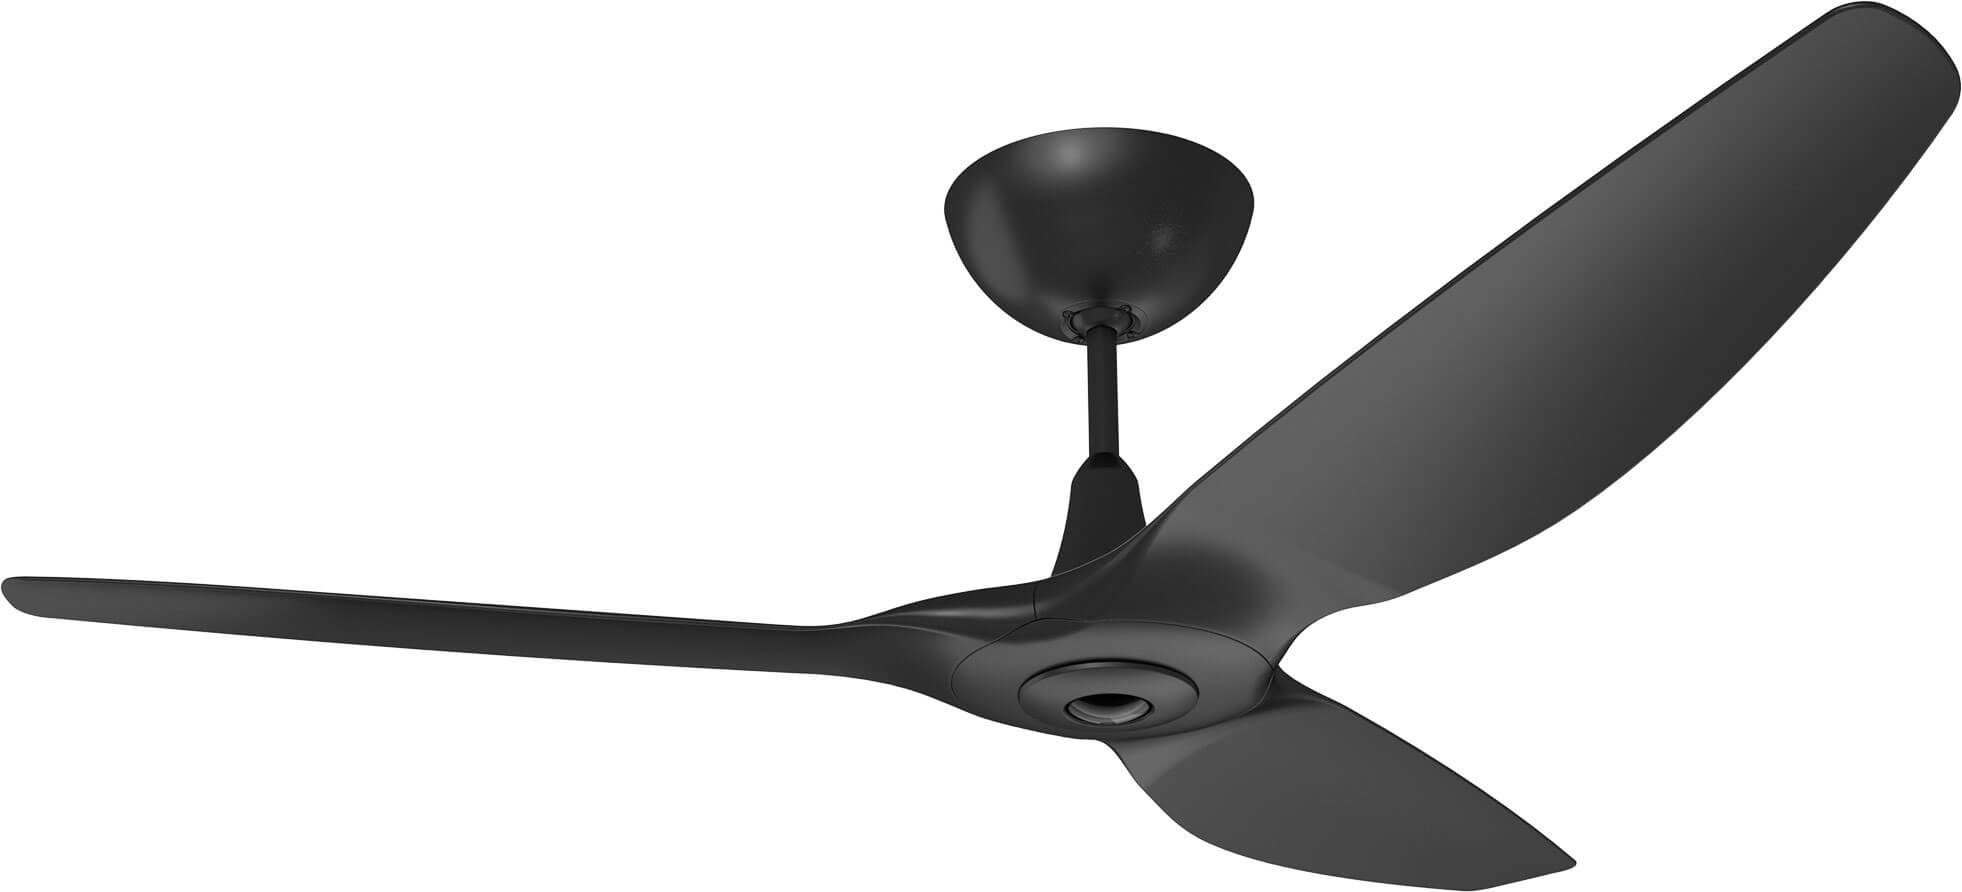 Ceiling Fan Rotation This Is How To Set It Jocoxloneliness